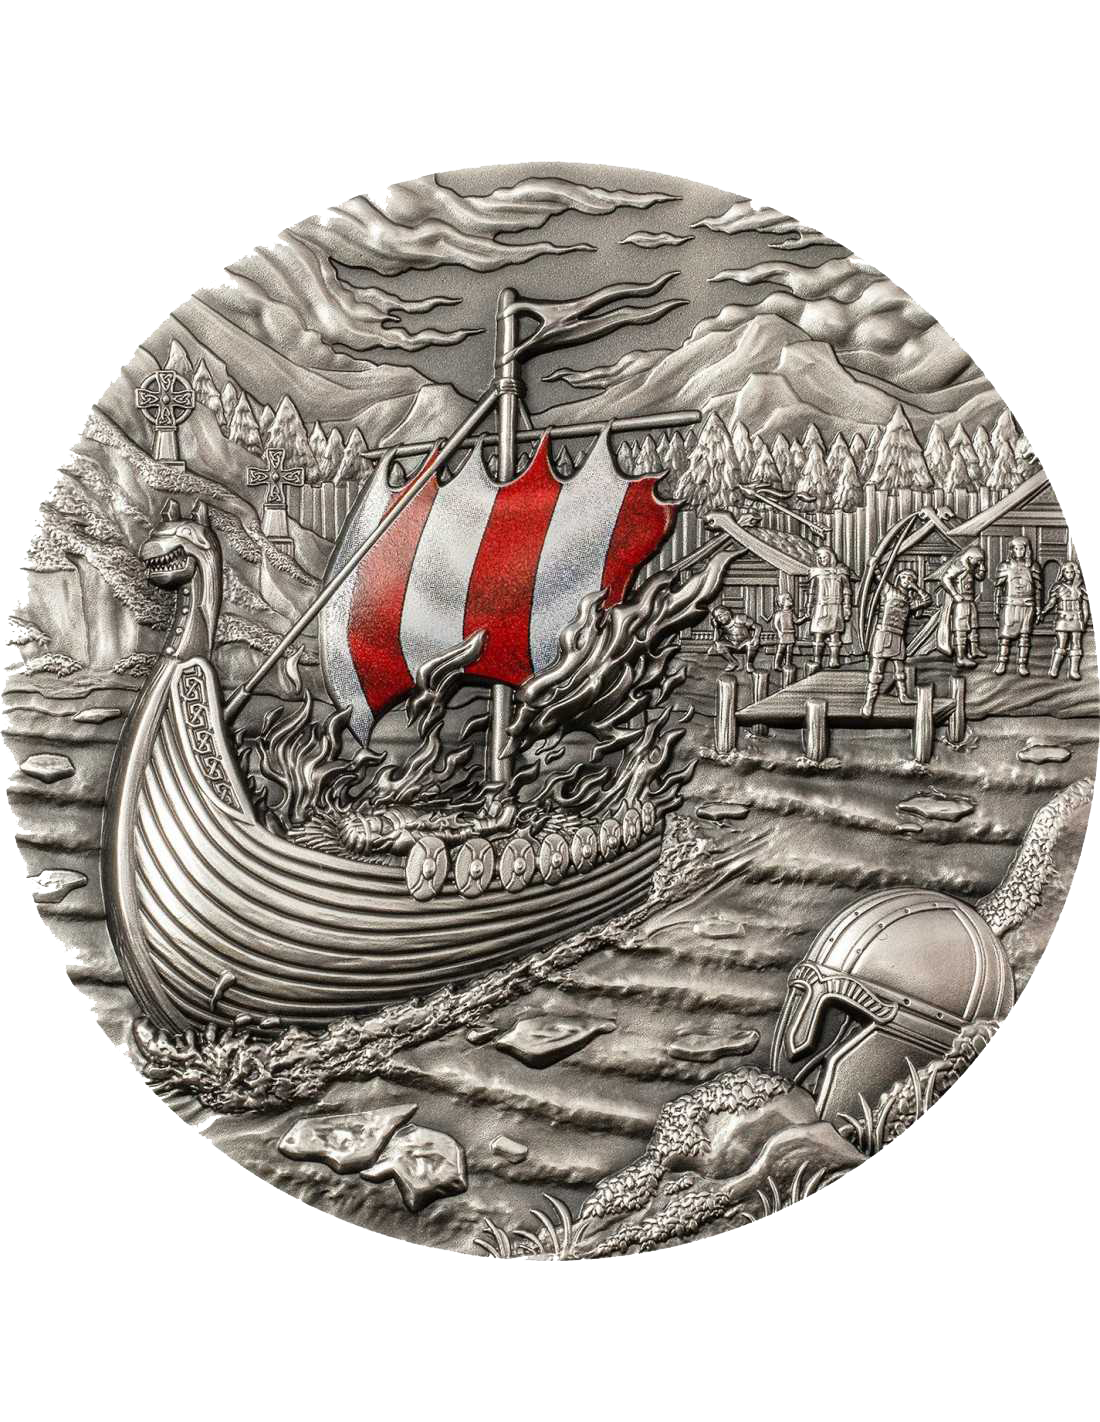   vikings-afterlife-rites-of-passage-2-oz-silver-coin-10-palau-202